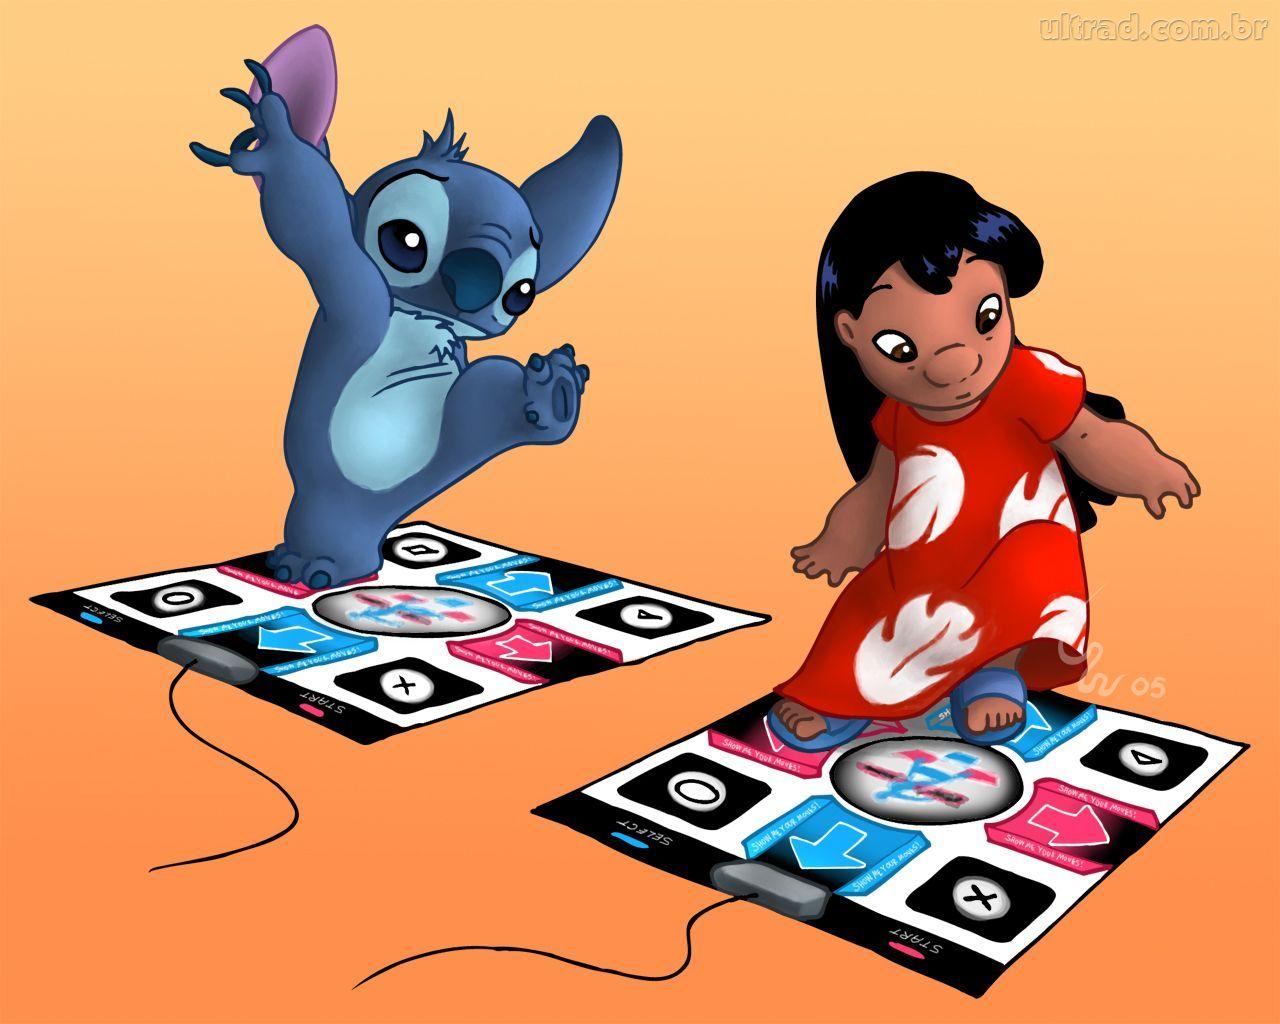 image about Stitch. See more about stitch